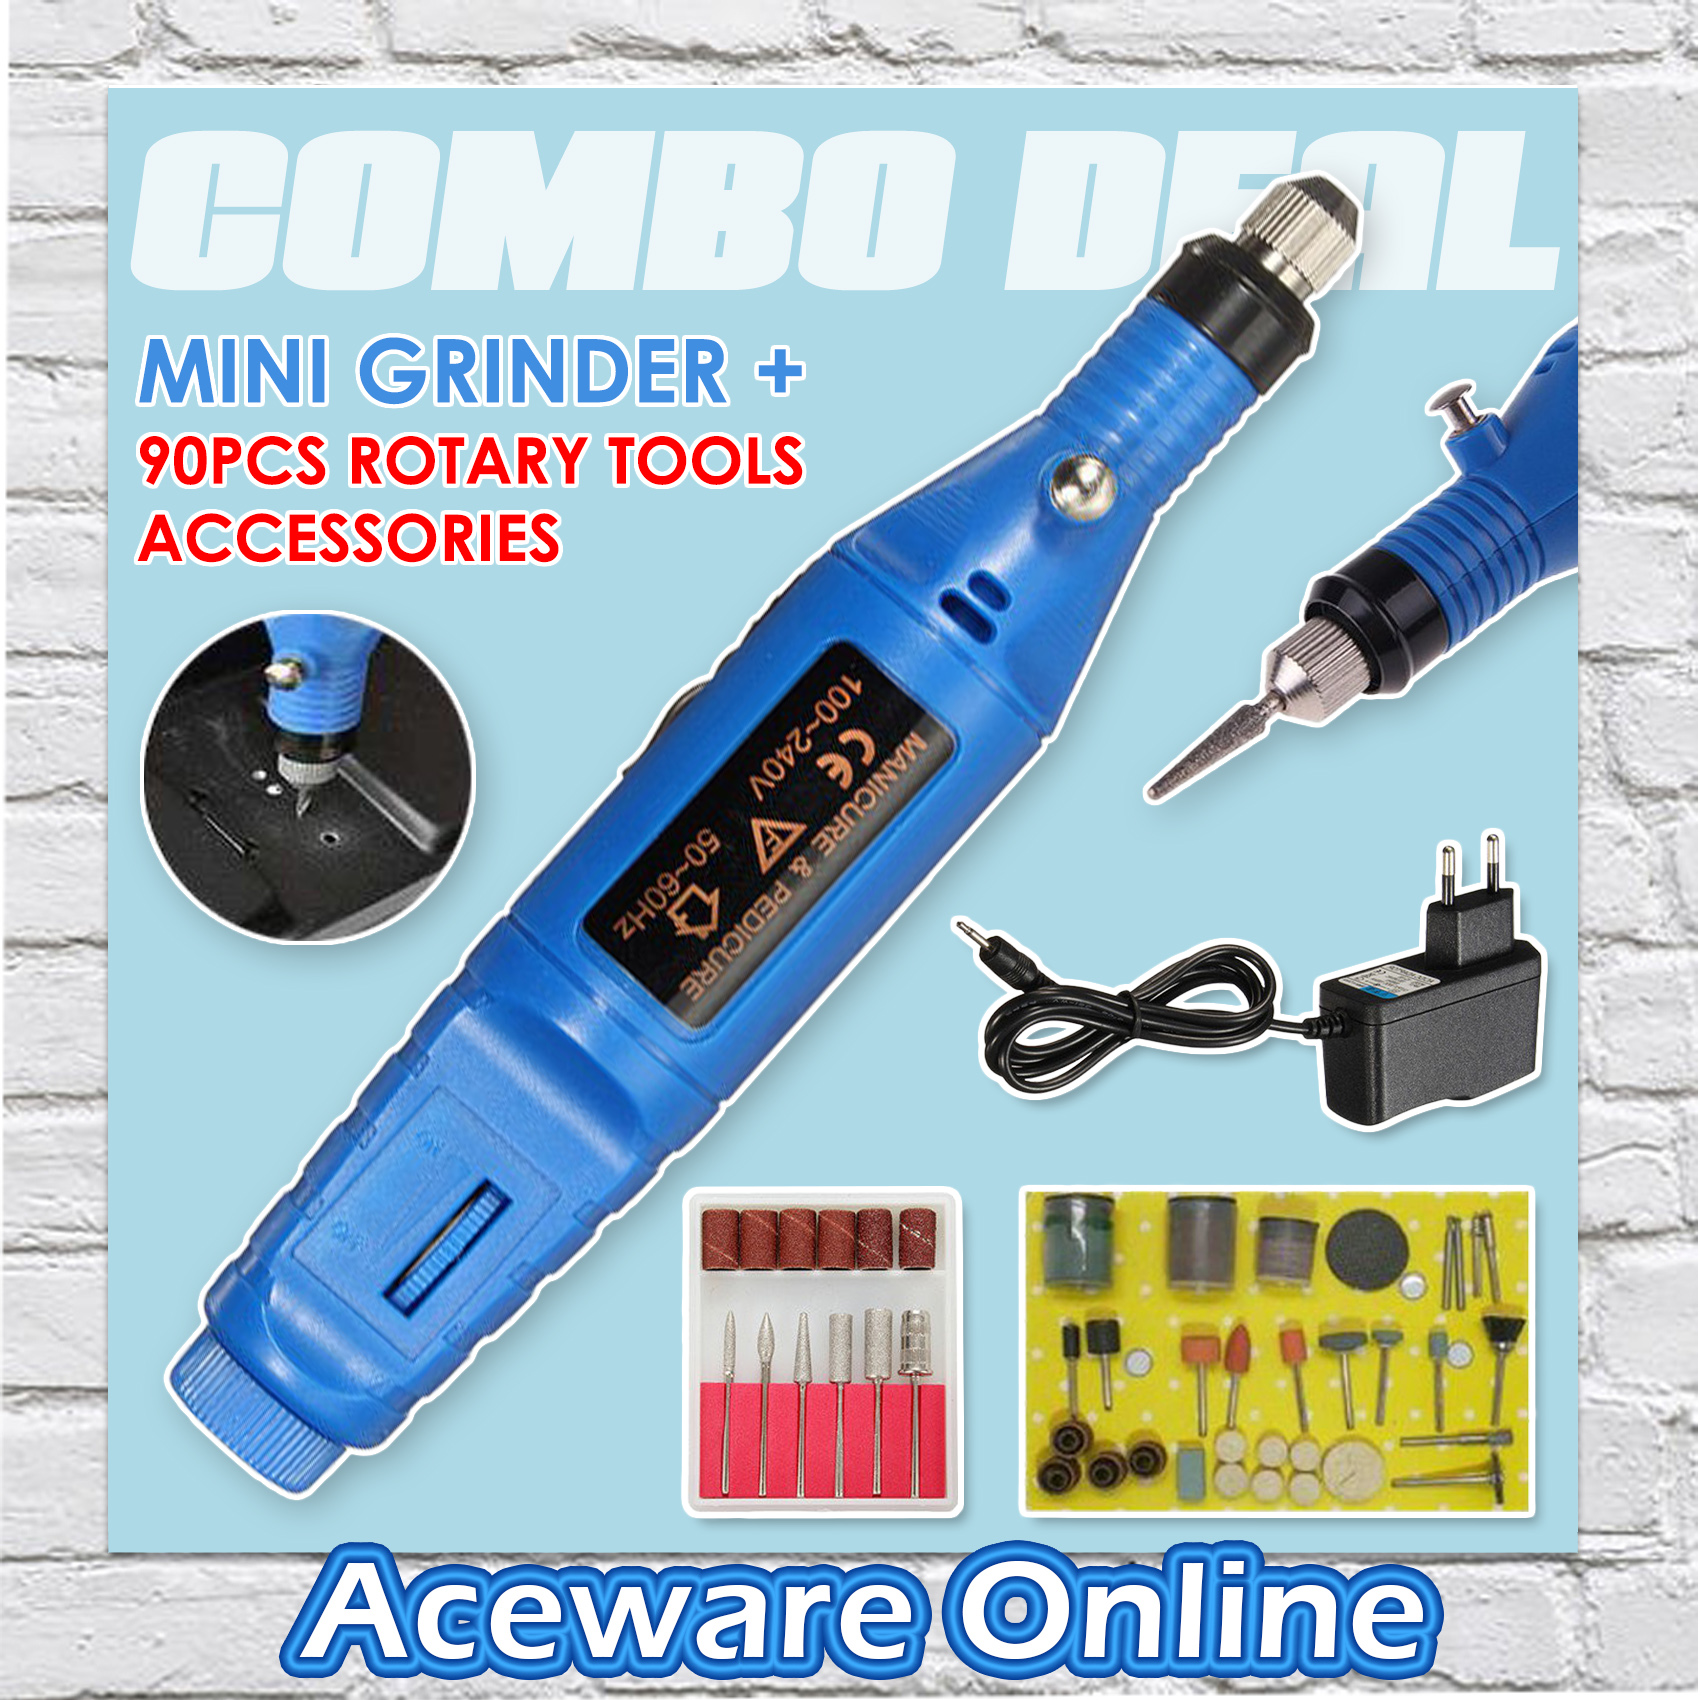 Mini Grinder Accessories, Rotary Tool Accessories